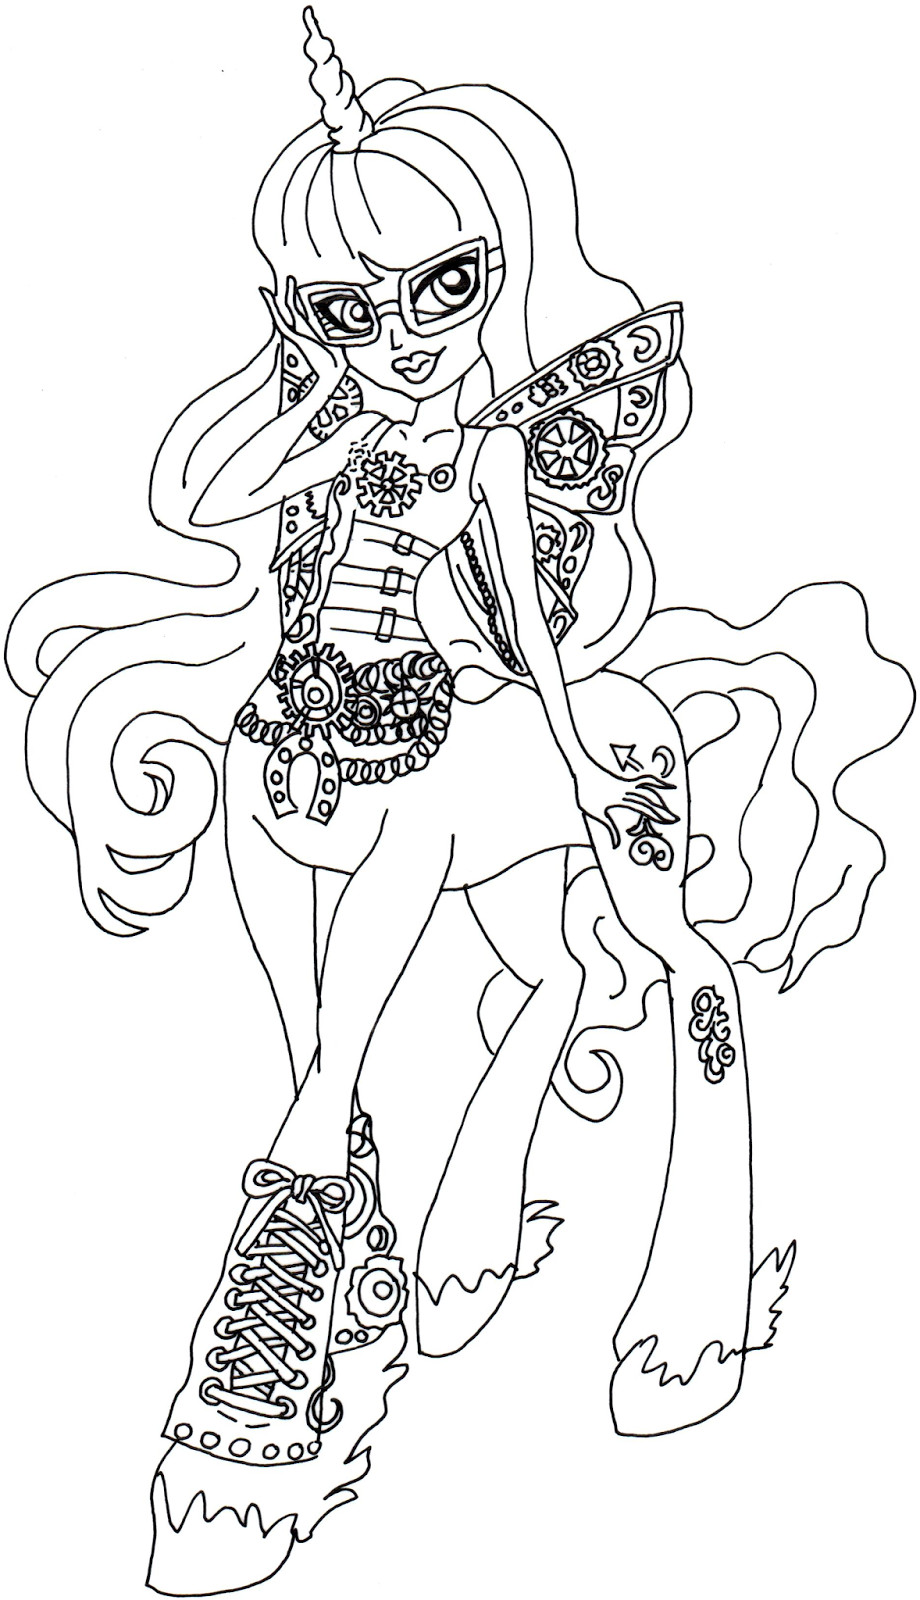 Free Printable Monster High Coloring Pages
 Free Printable Monster High Coloring Pages Penepole